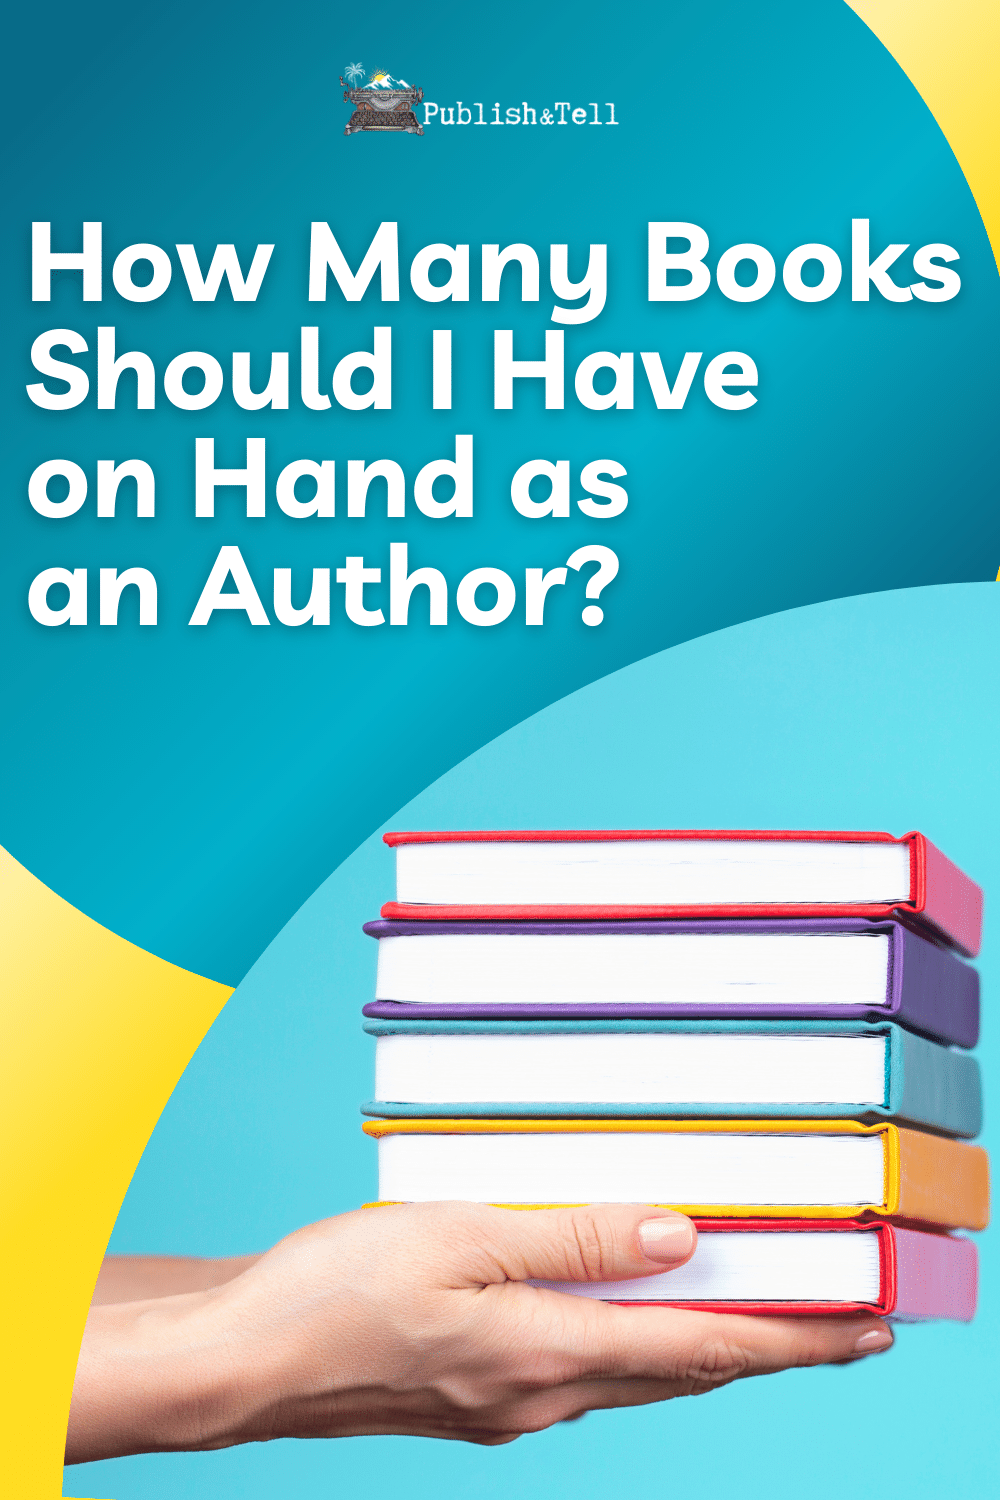 How Many Books Should I Have on Hand as an Author?